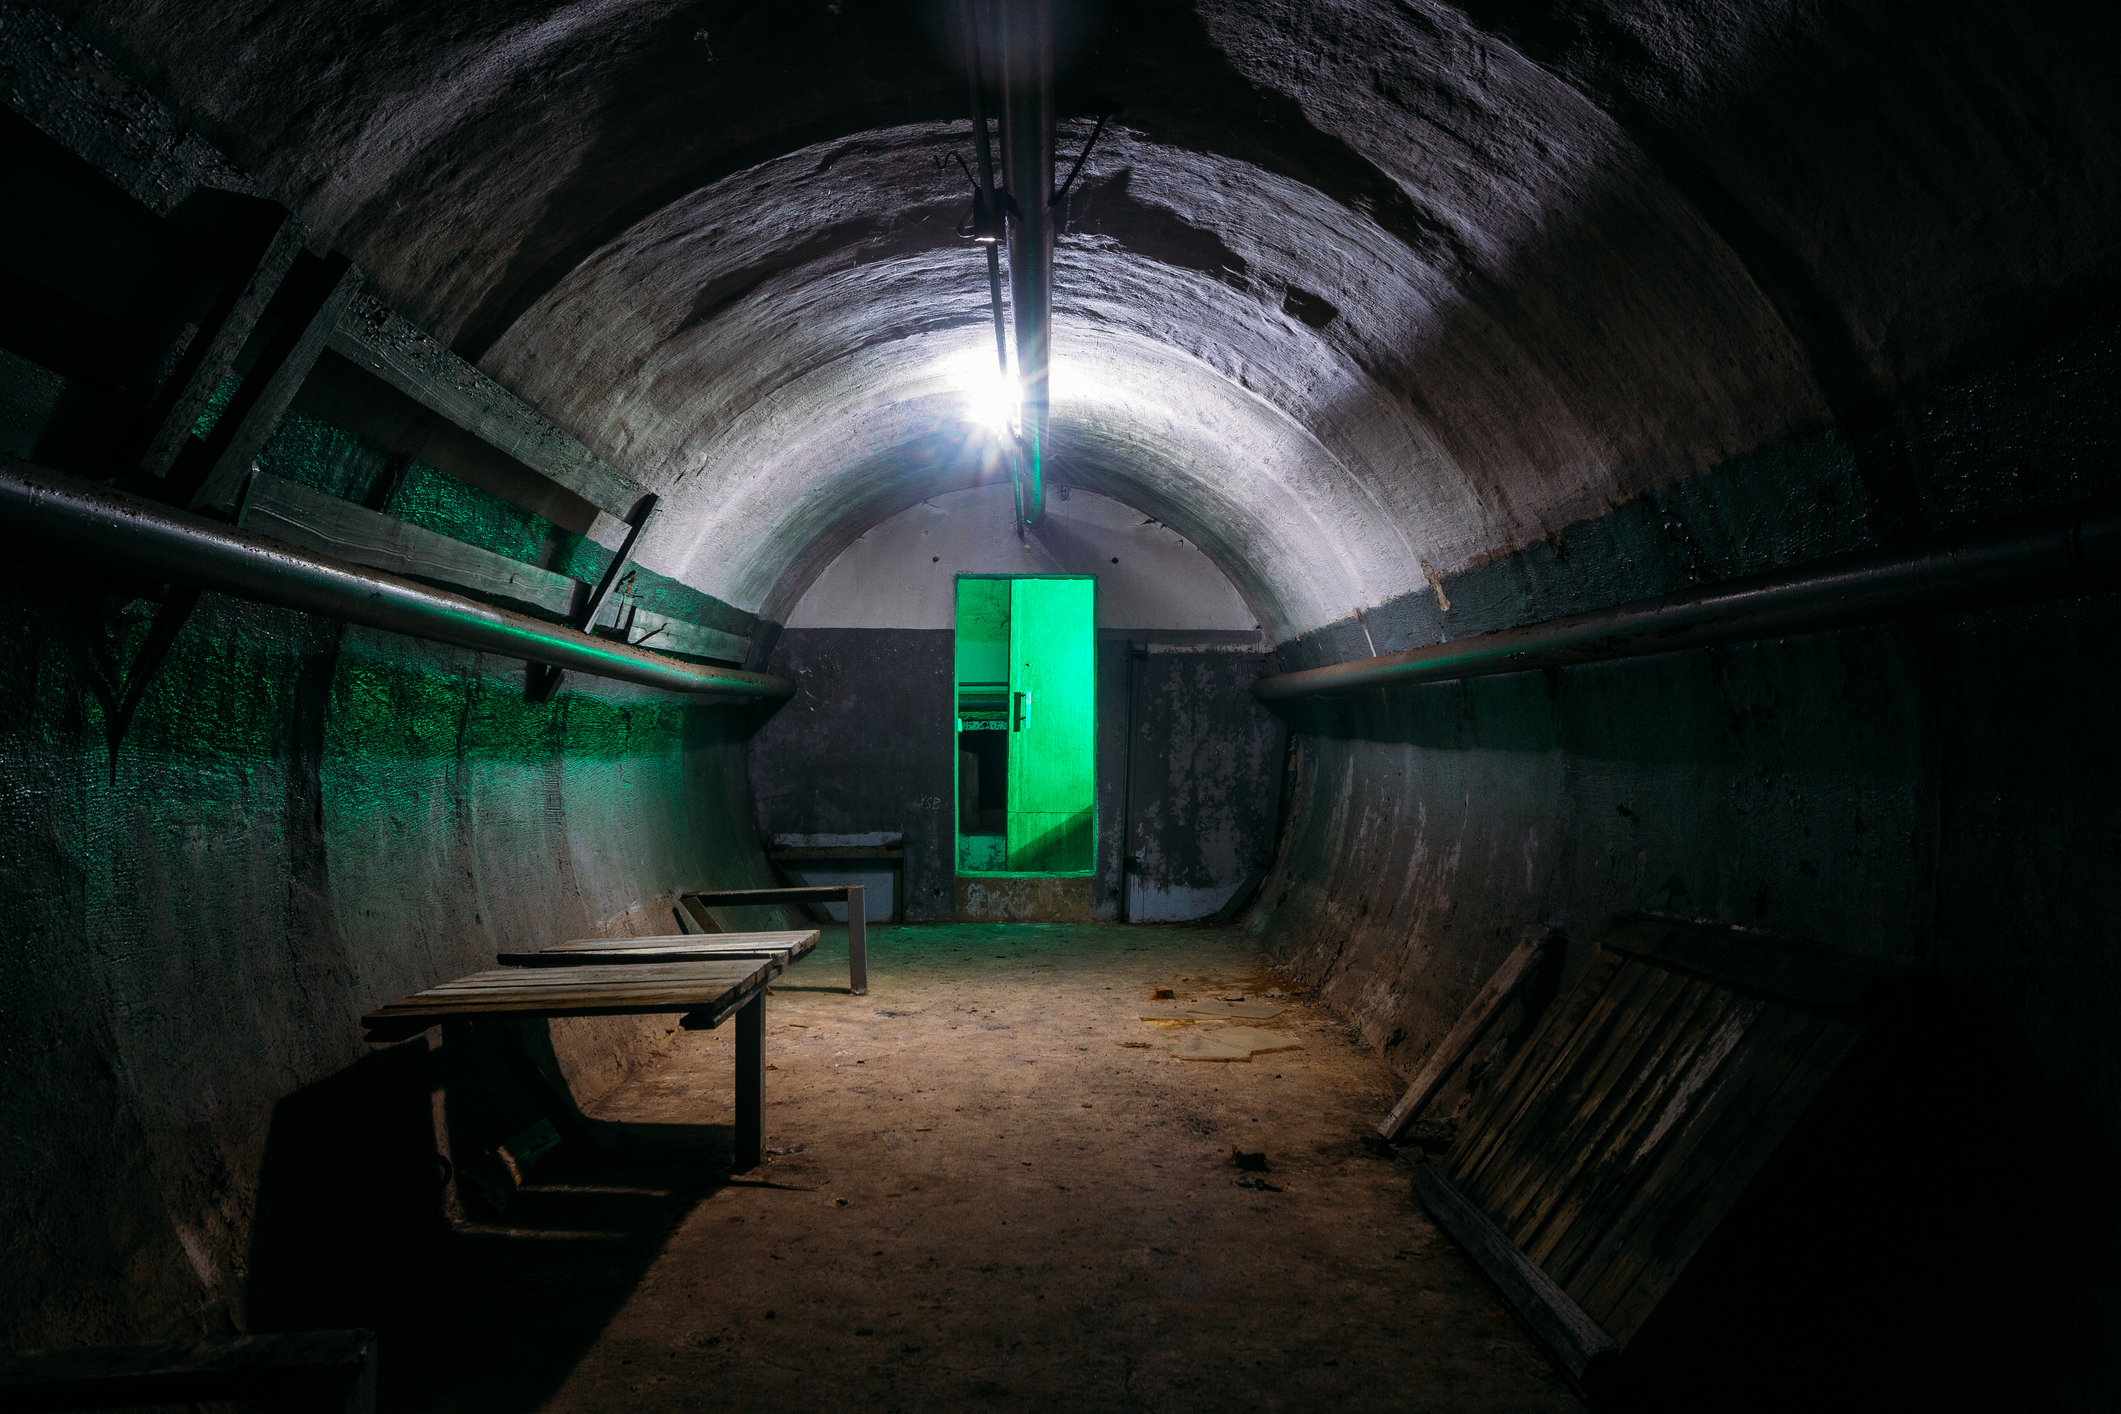 An illuminated green door at the end of a dark, arch-shaped tunnel with benches on sides